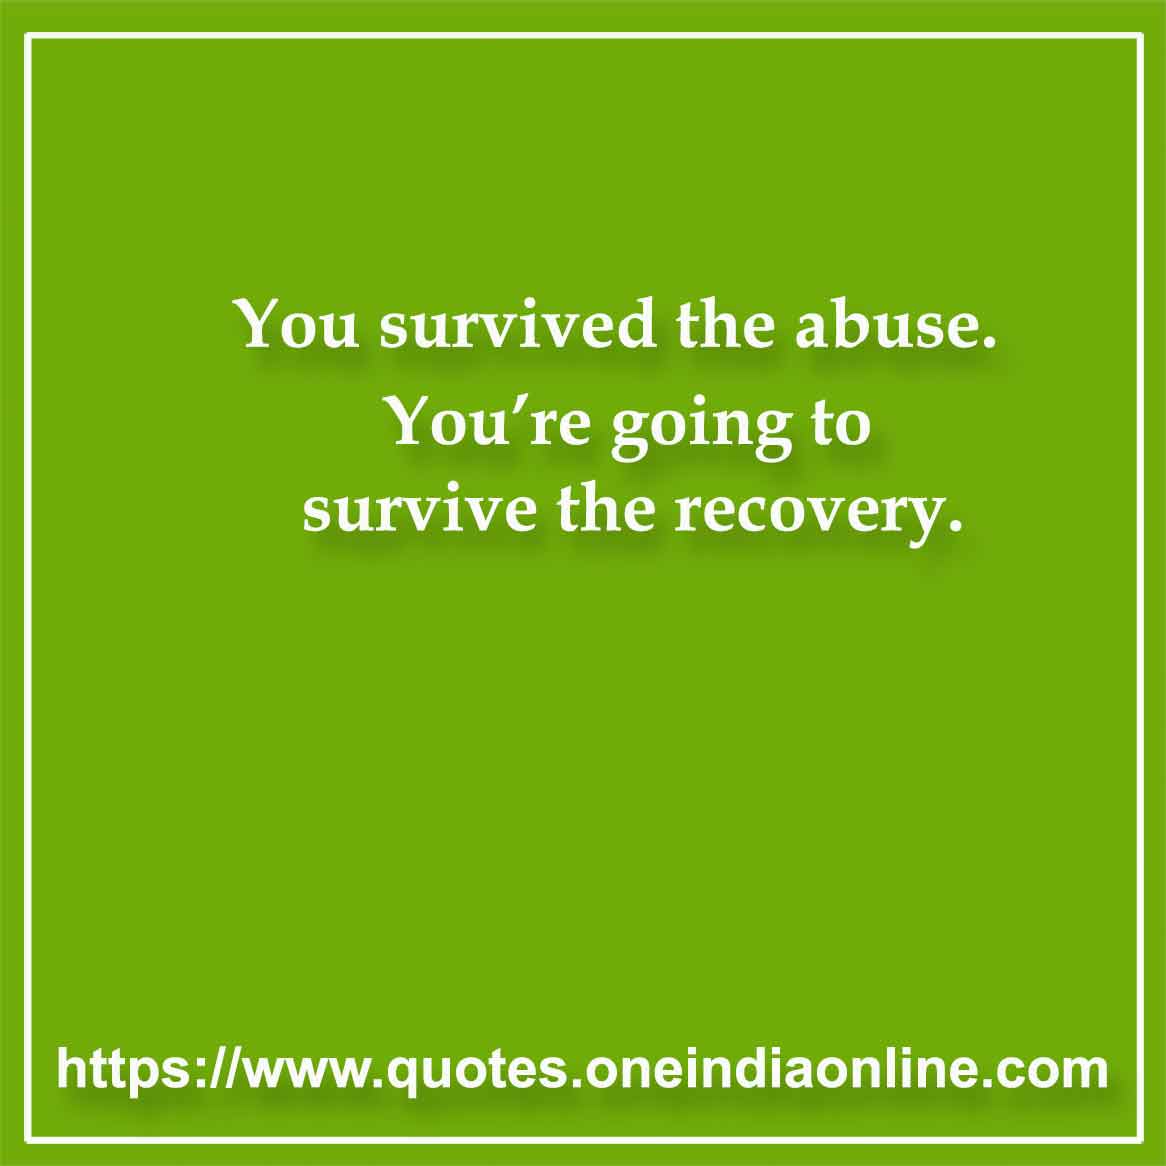 You survived the abuse. You’re going to survive the recovery.